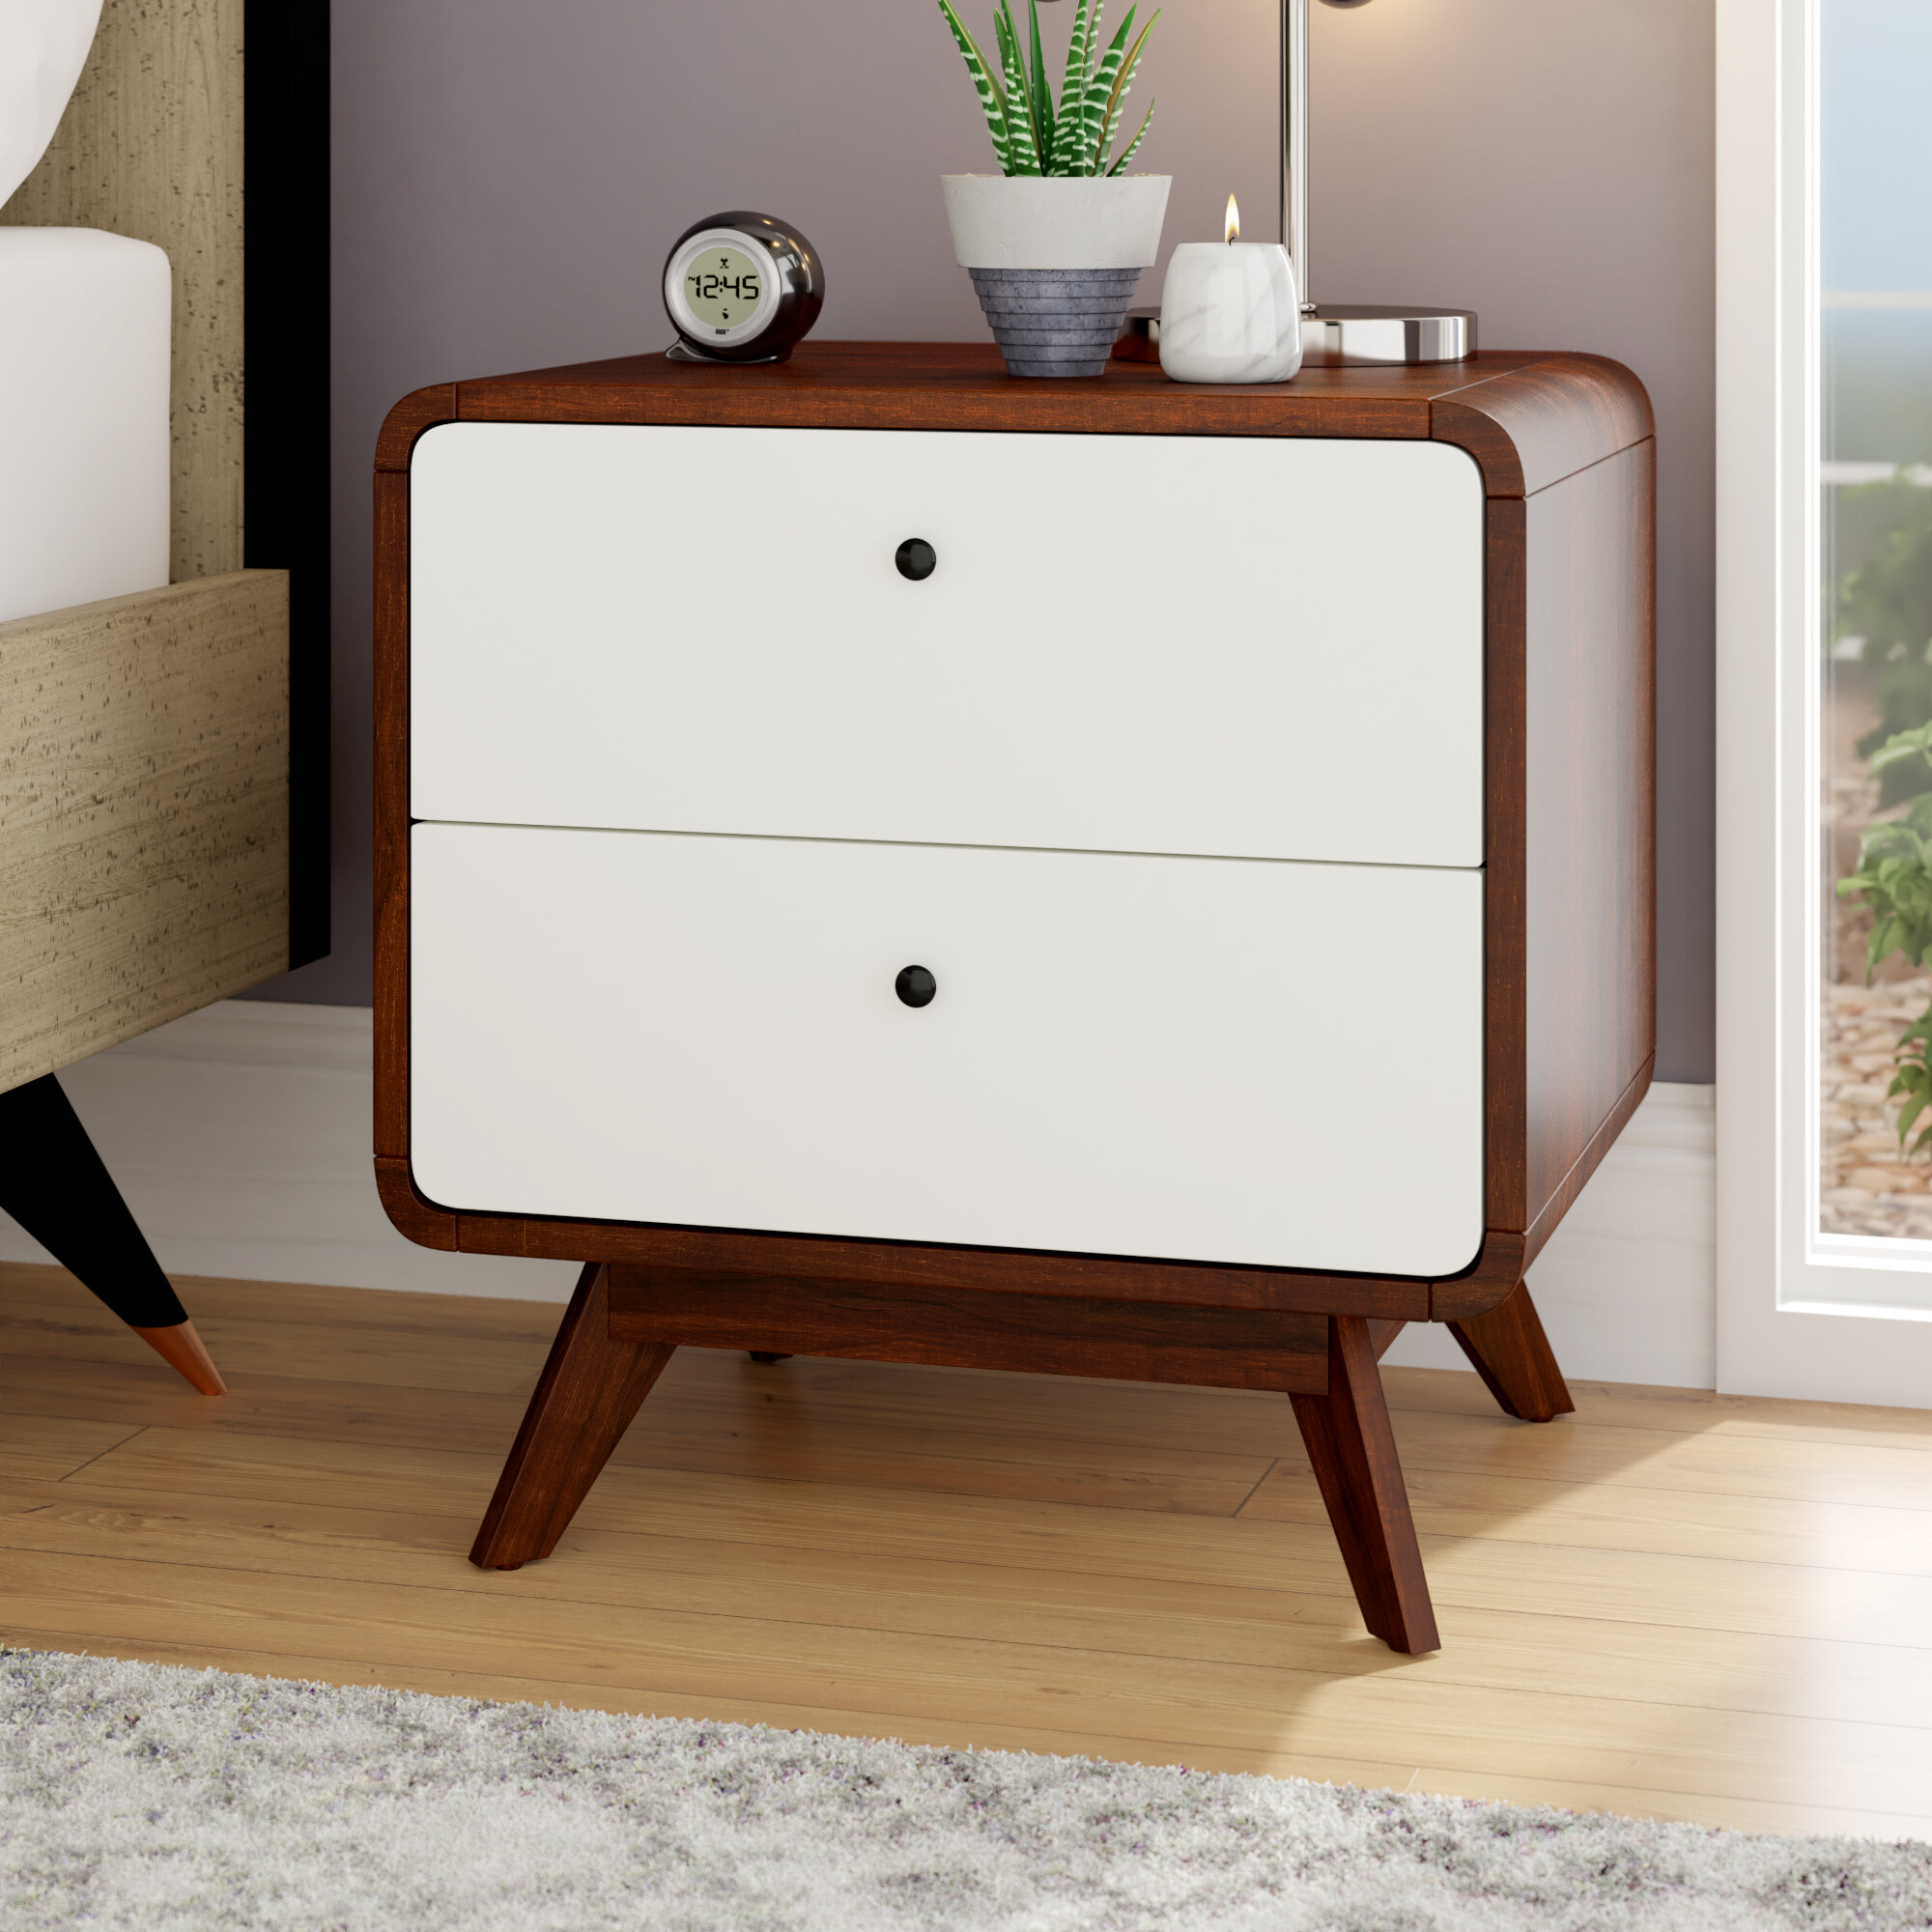 Living Skog Mid Century Side Table 2 Drawer White Beige Multipurpose Small Desk Makeup Table With Easy Glide Drawers Scandinavian Nightstand With 2 Drawers Nightstands